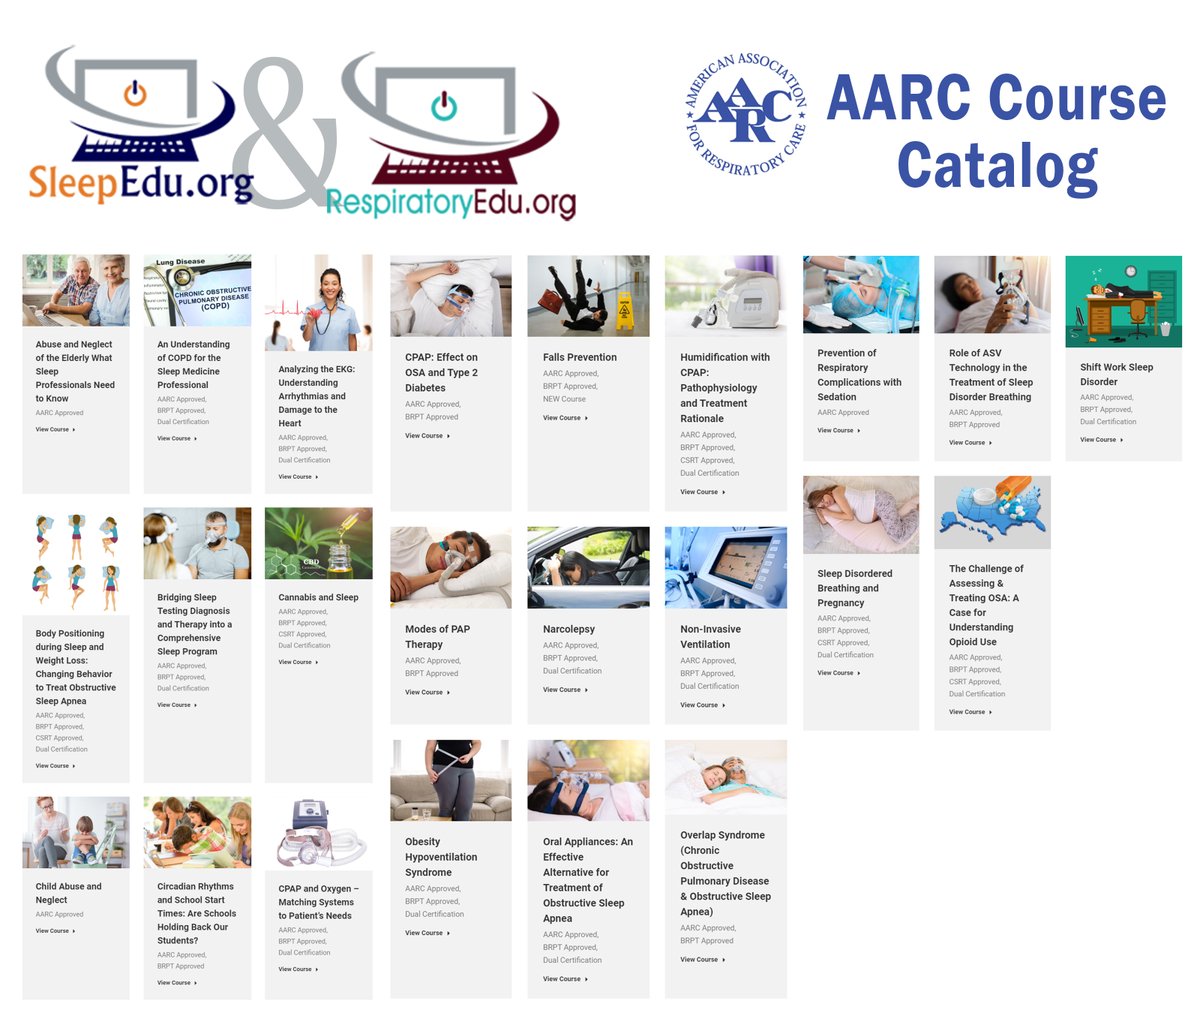 See our new AARC approved course catalog for 2024: sleepedu.org/aarc-approved-…
✅ Our Sleepedu and Respiratoryedu Courses that are approved by AARC for CECs.
✅All courses are Peer / Physical Reviewed
✅Each course provides (1) credit: AARC CREDIT 1.0 CRCE, and cost $21.29/each.